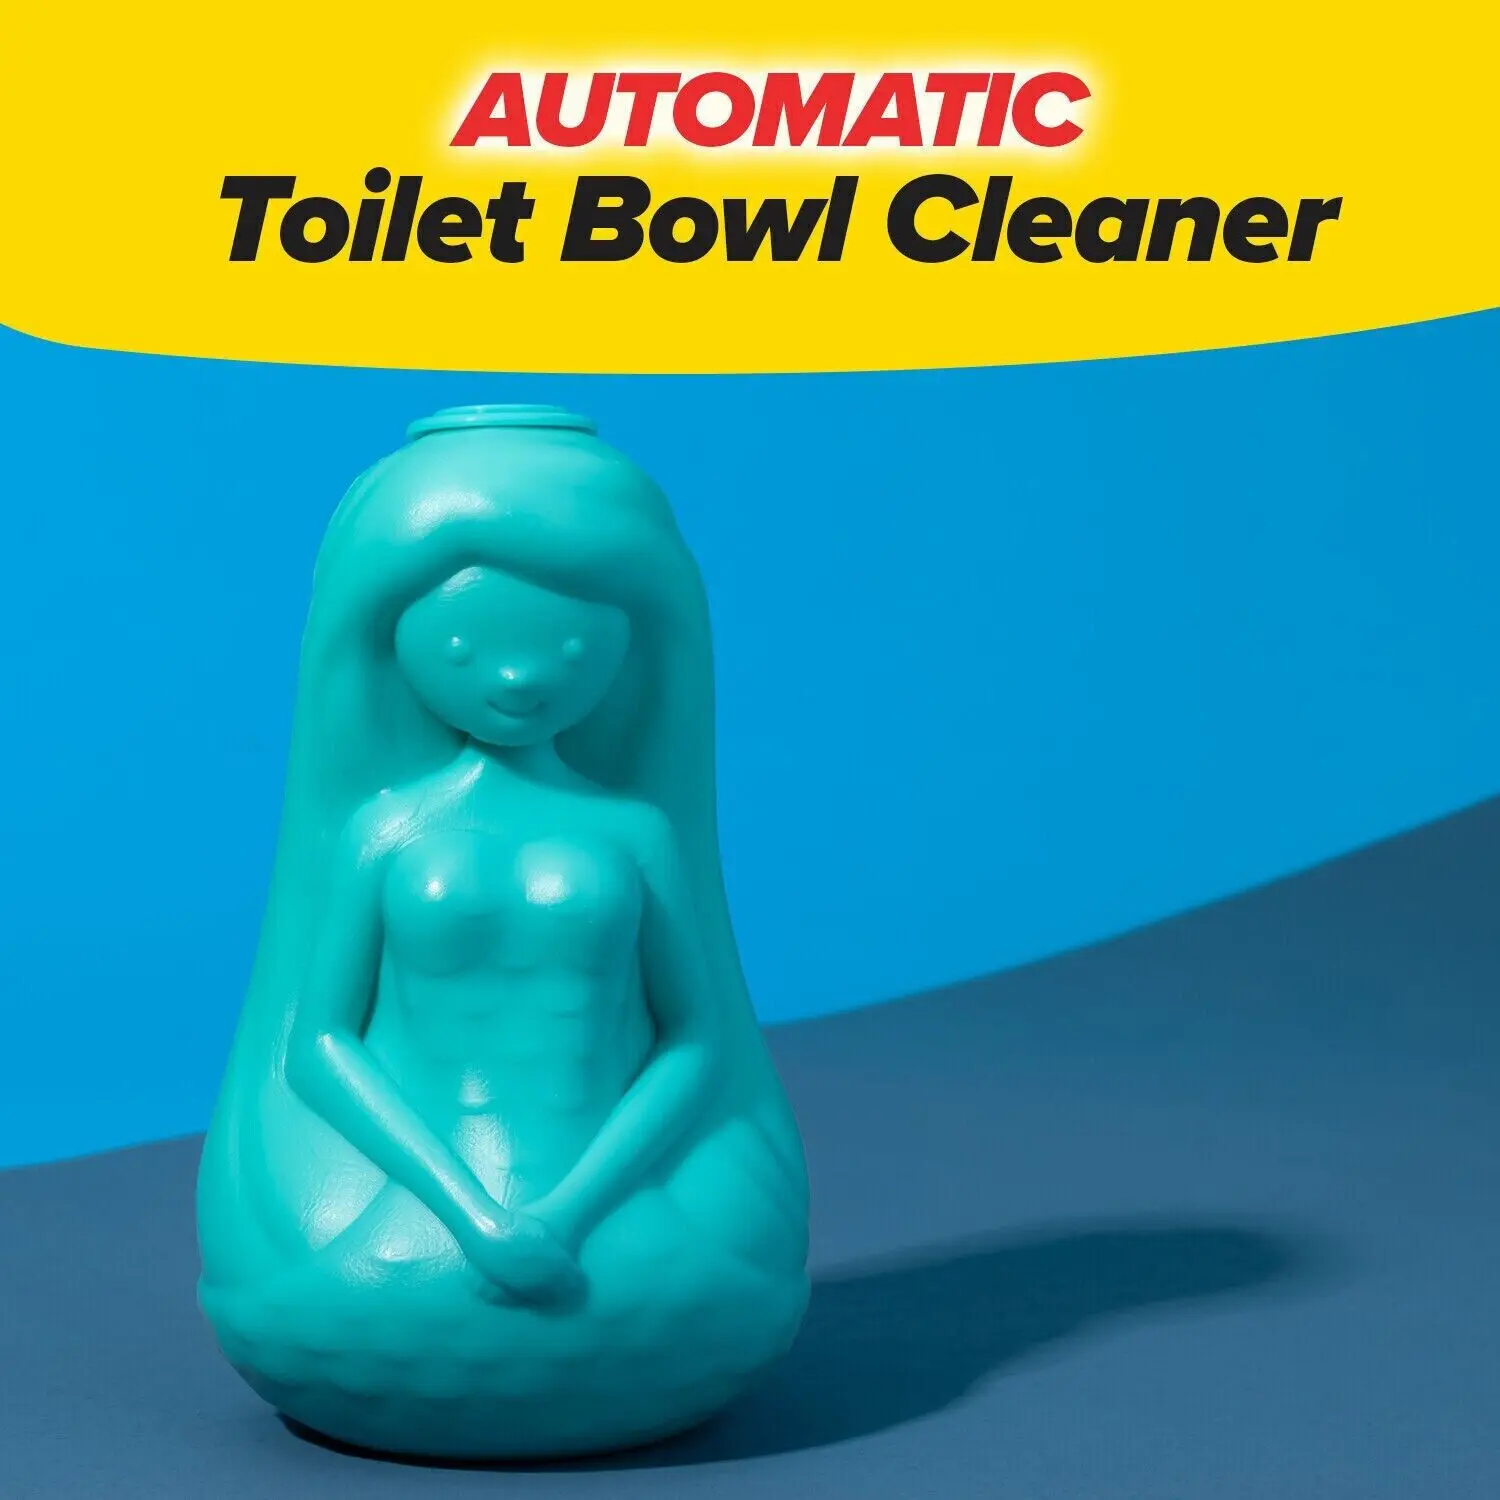 

Mer-Maid Automatic Toilet Bowl Cleaner, AS-SEEN-ON-TV